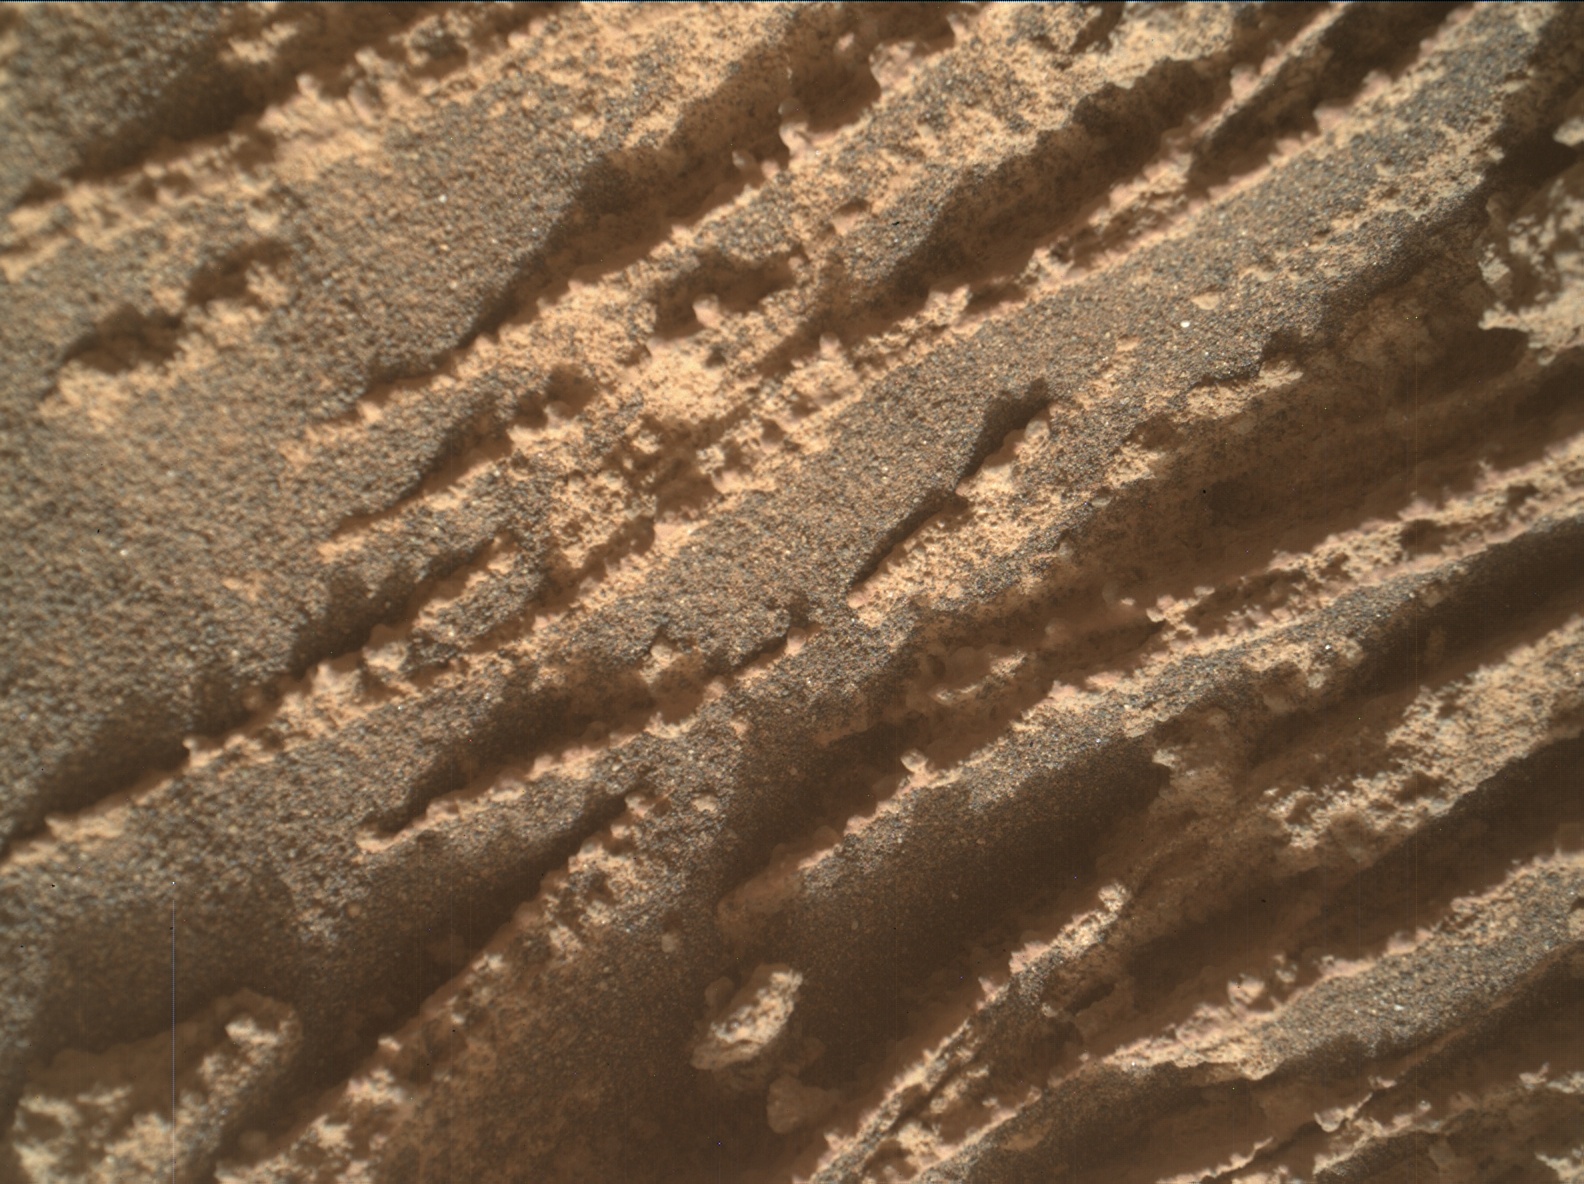 Nasa's Mars rover Curiosity acquired this image using its Mars Hand Lens Imager (MAHLI) on Sol 3362